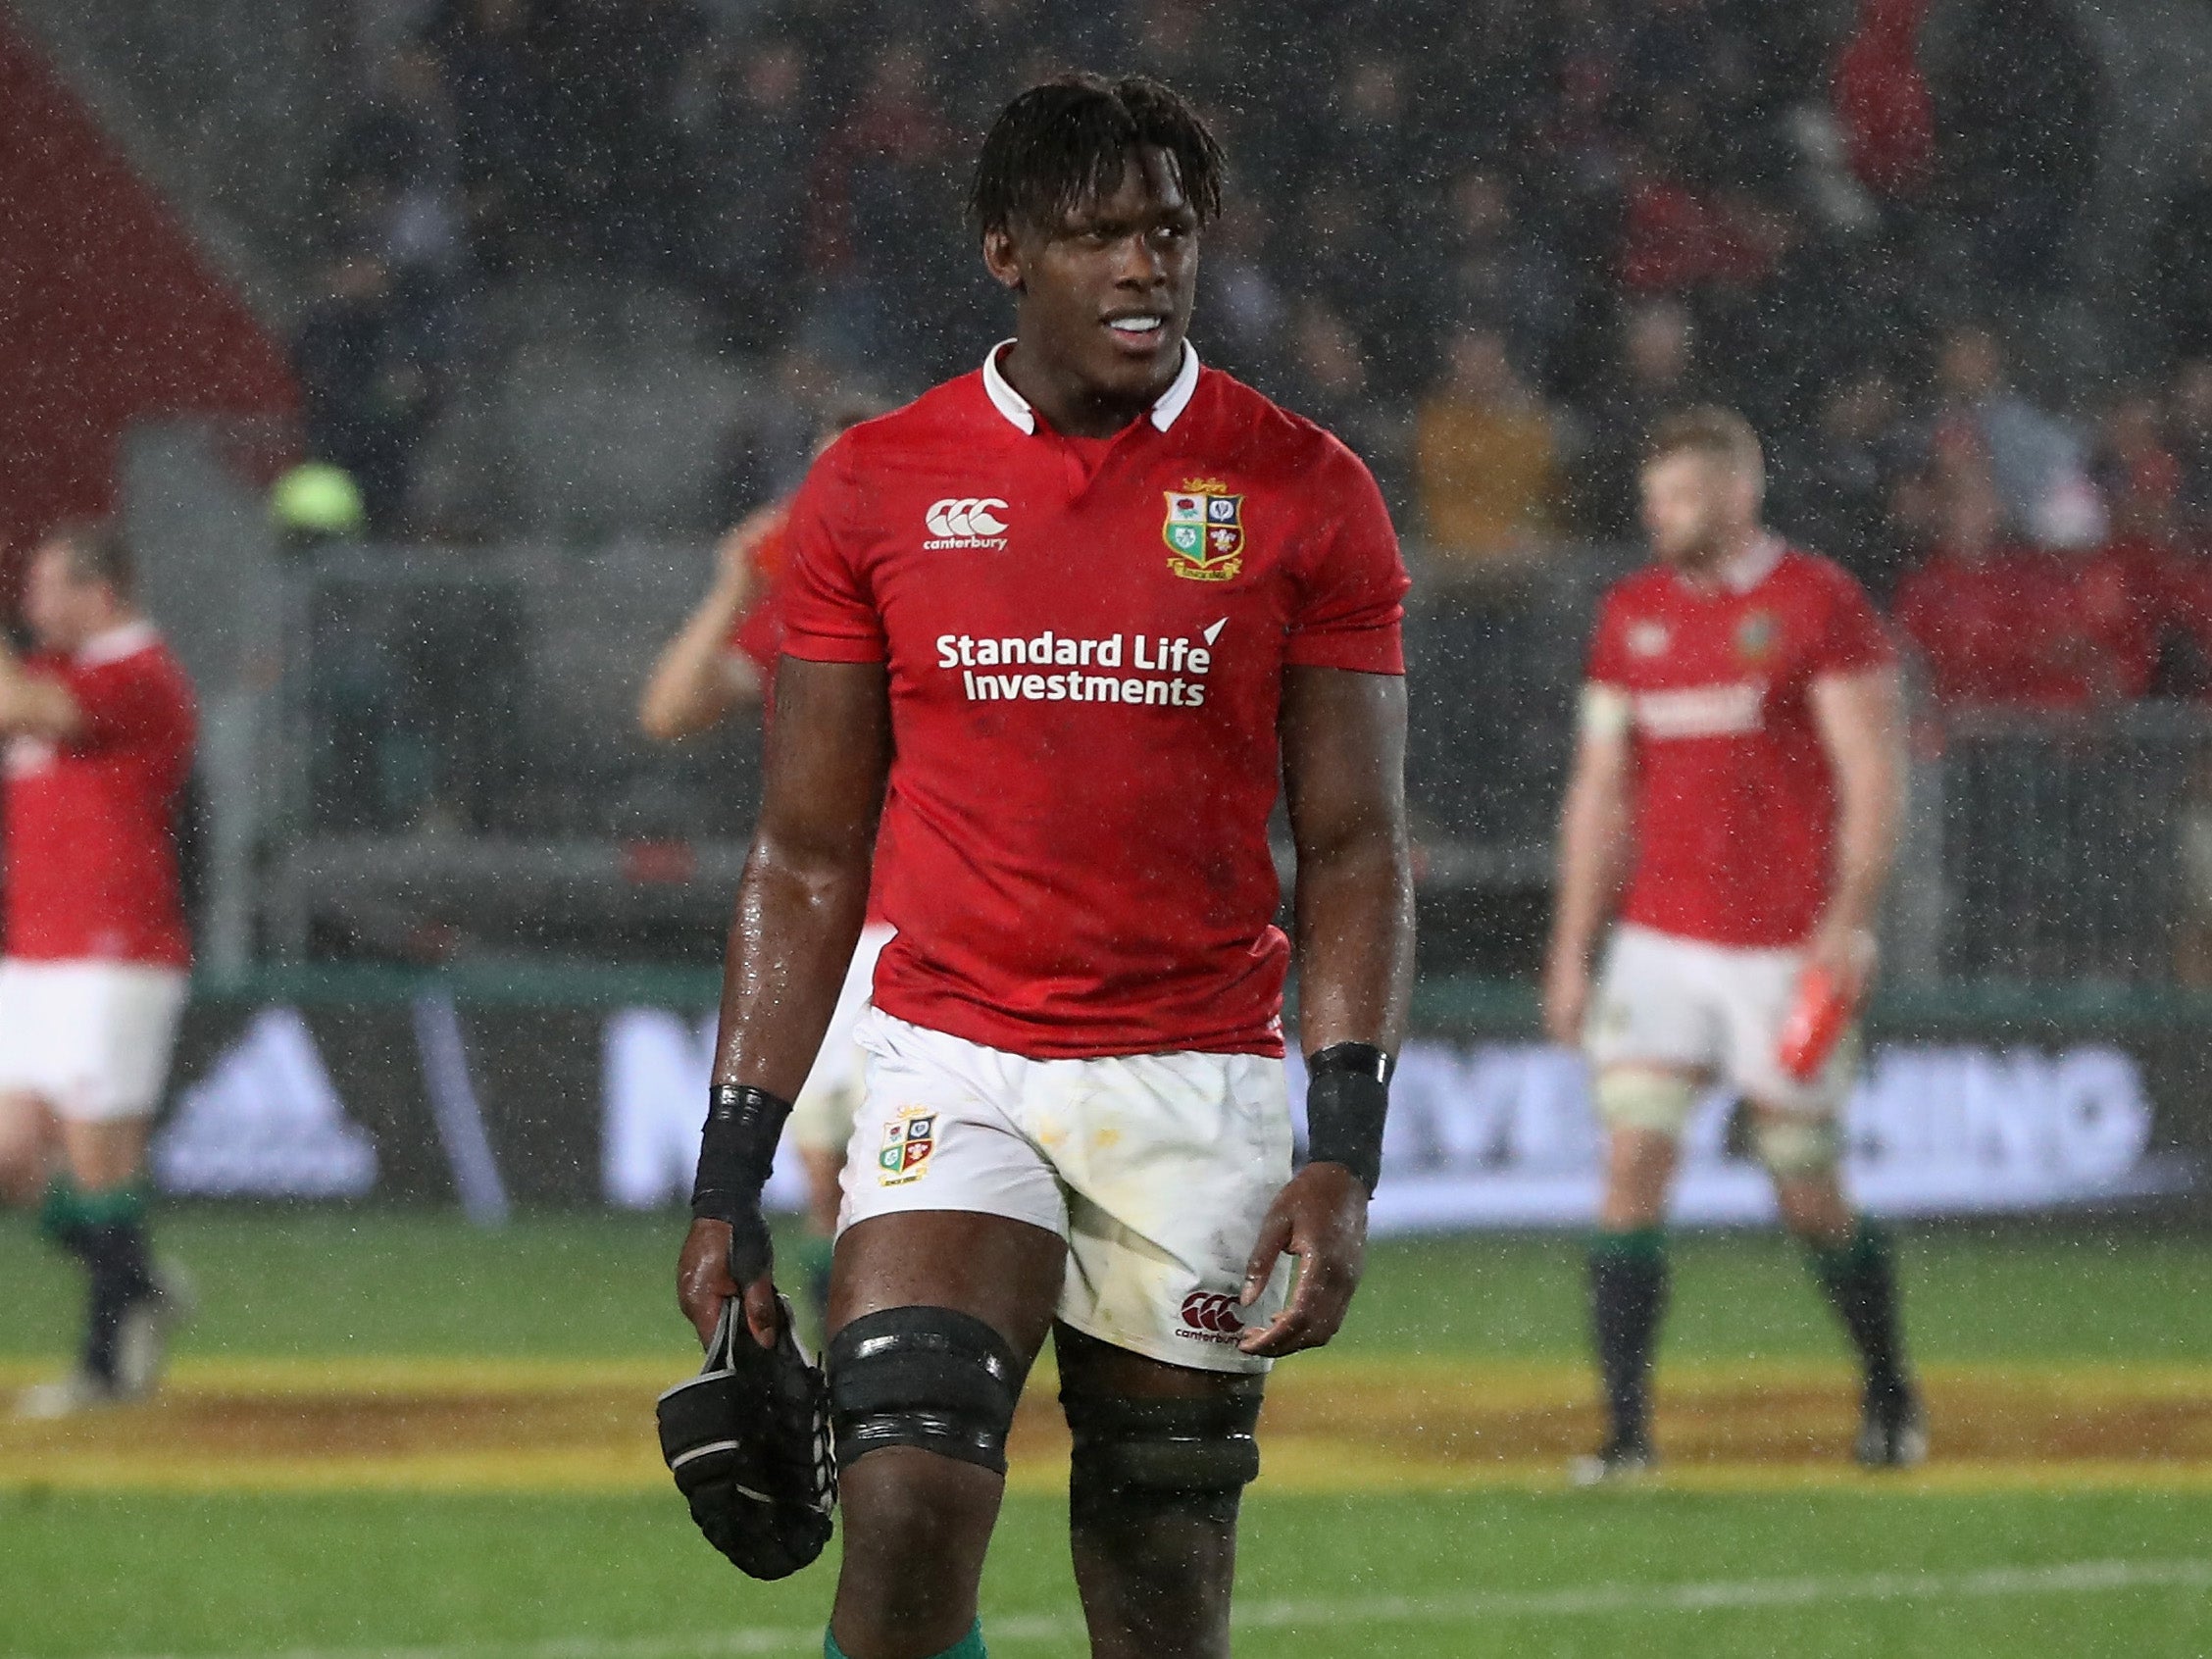 Itoje was impressive when he came on after 47 minutes on Saturday